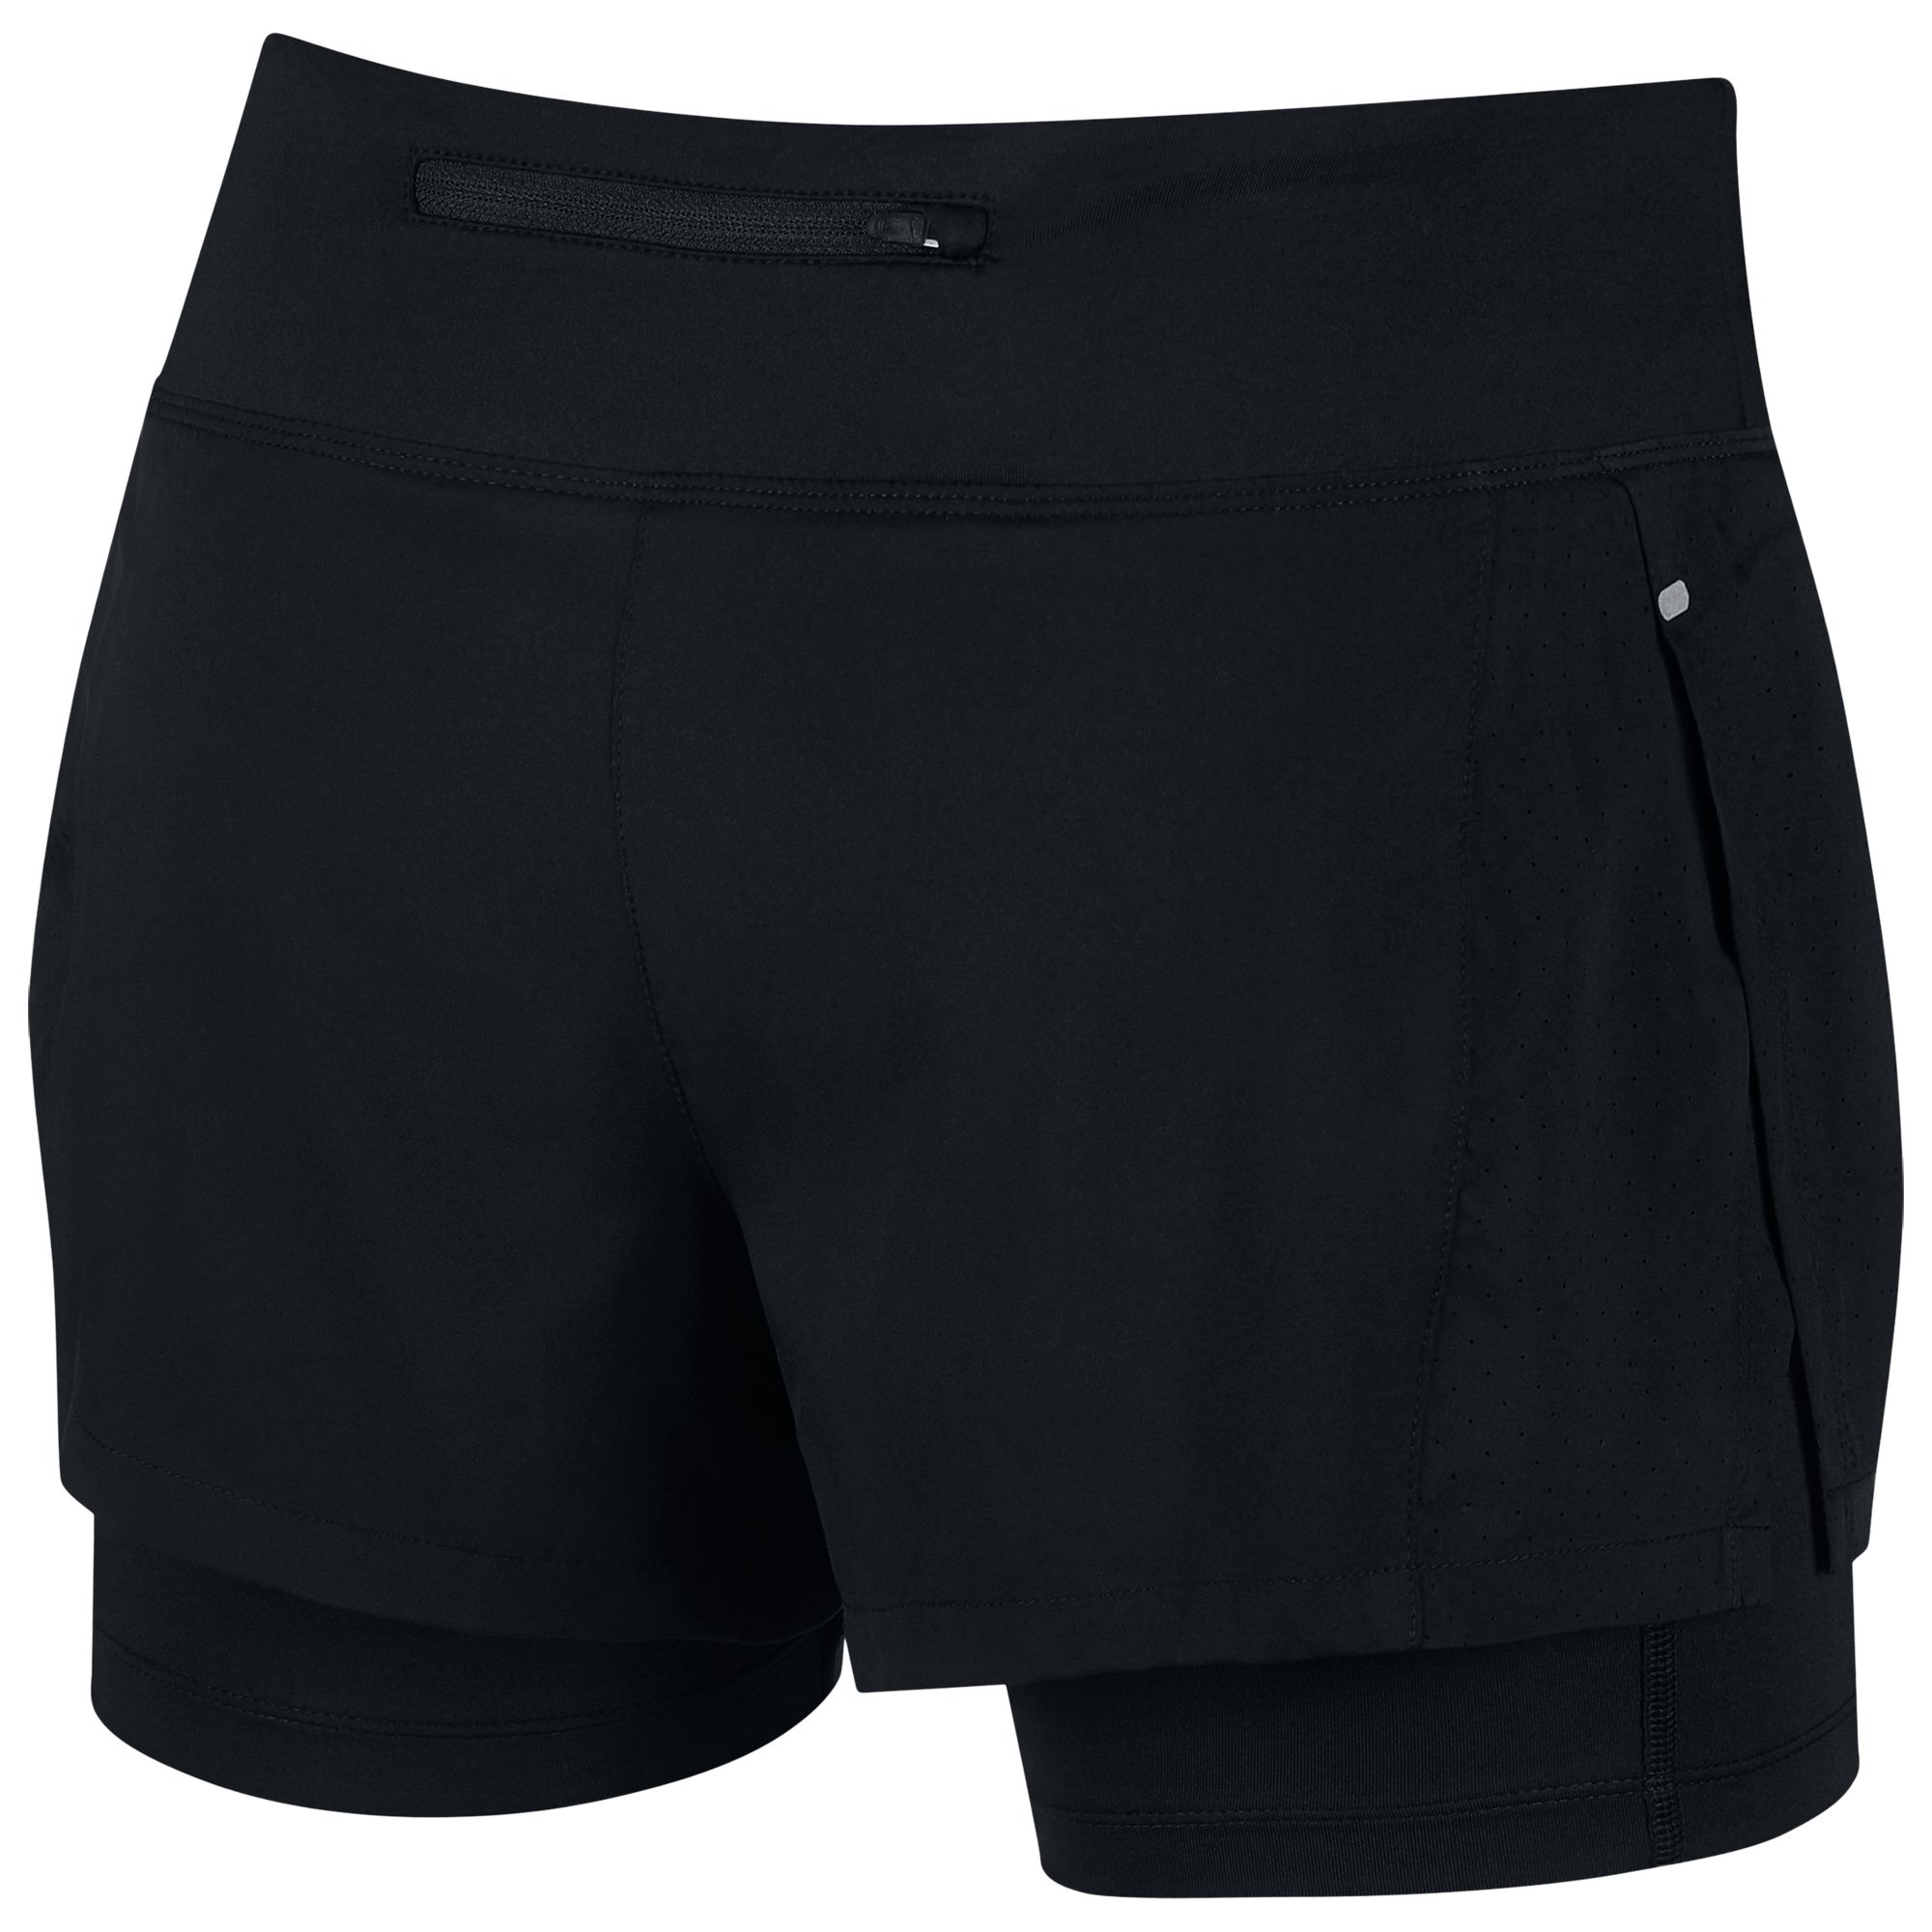 nike running eclipse 2 in 1 shorts in black